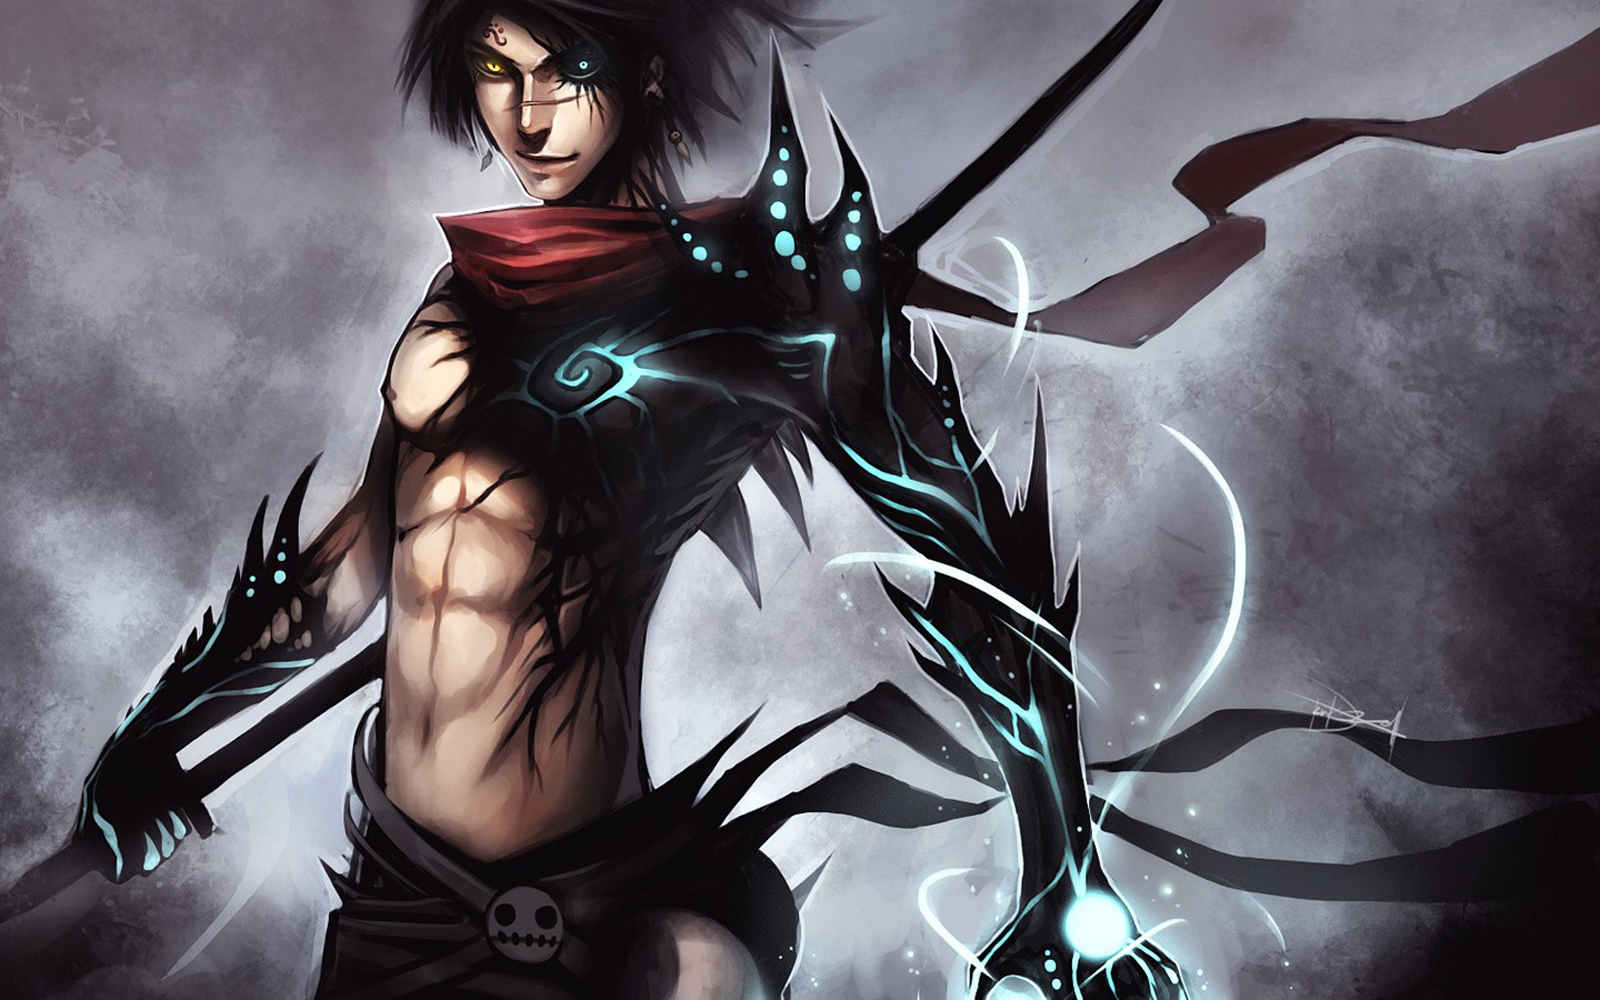 Weapon Male Anime HD Wallpaper Background Photo Image Picture Jpg